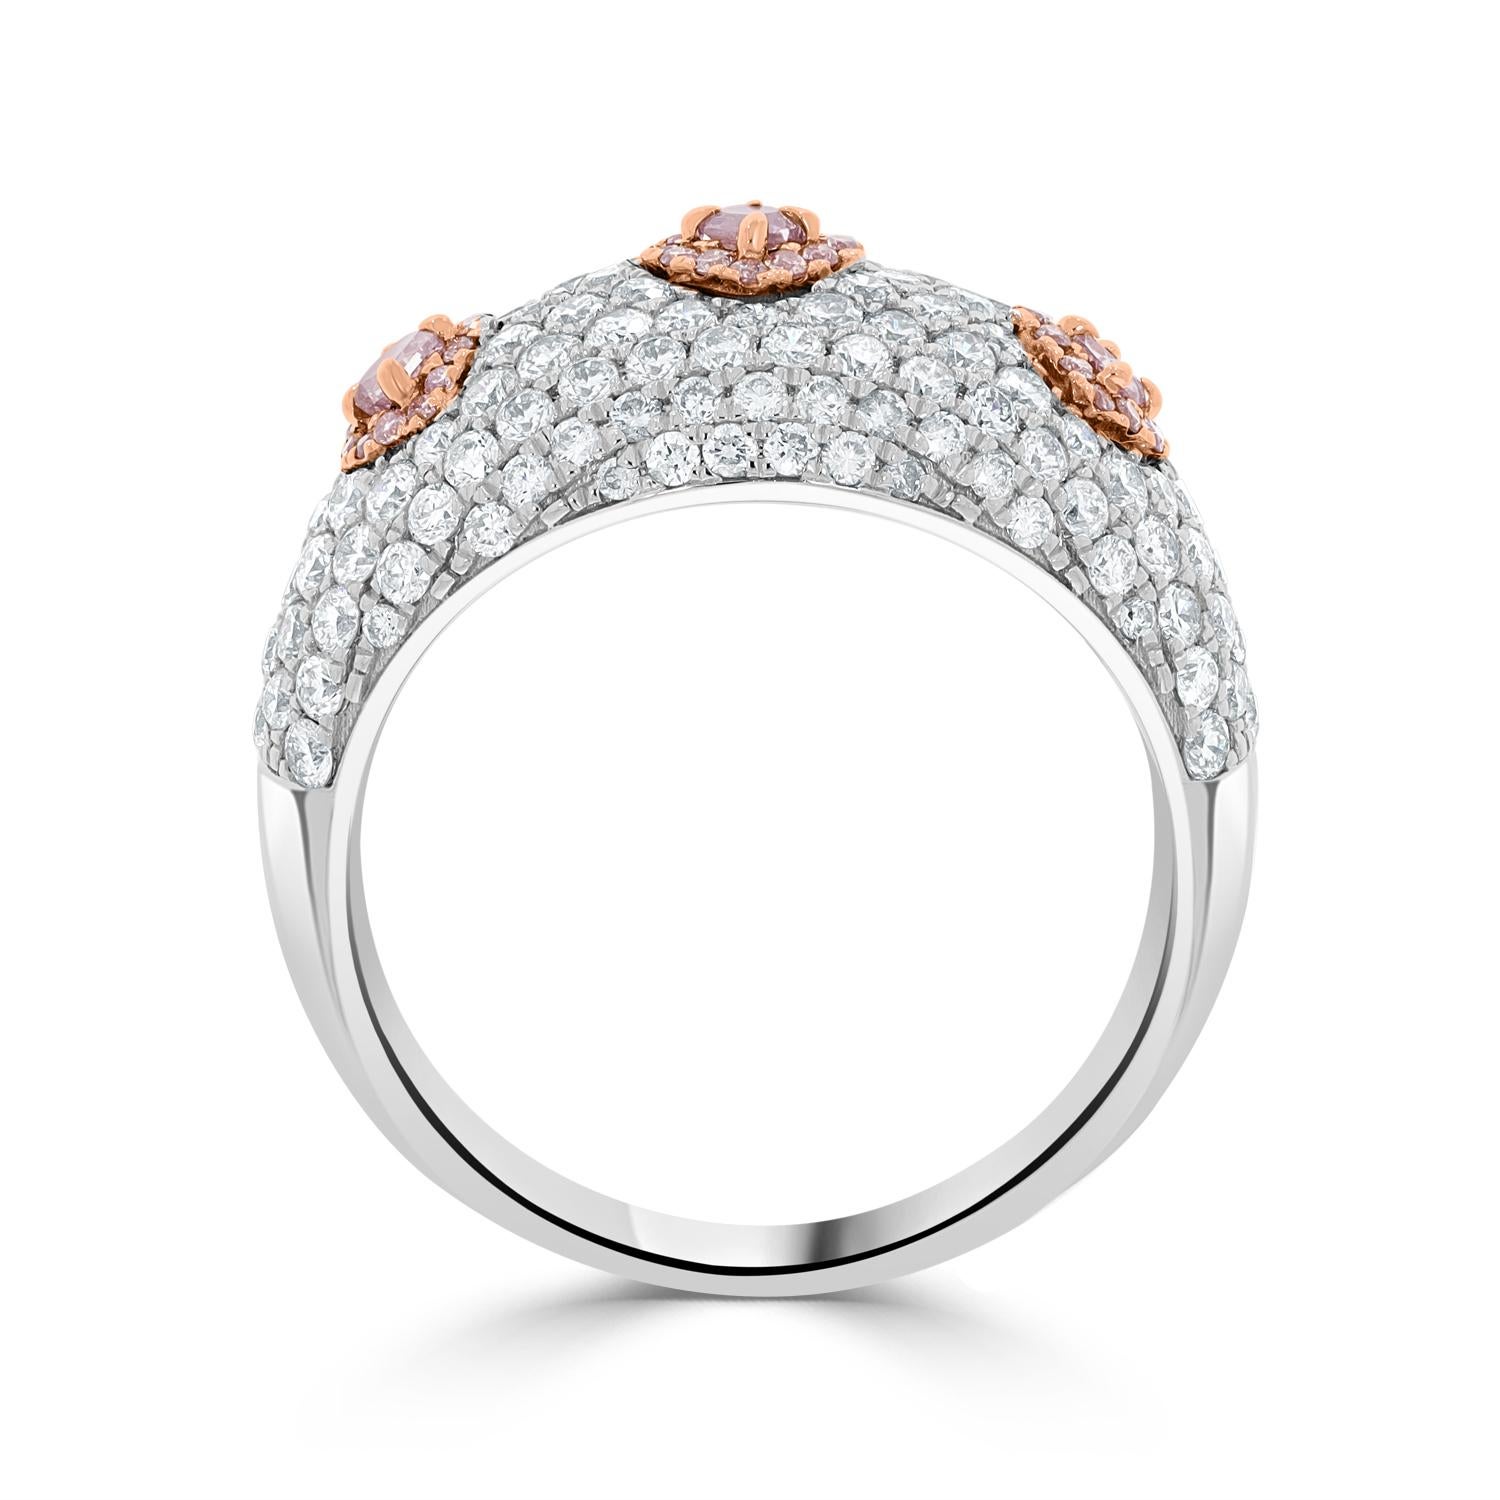 This Pink Diamond Ring with Diamonds set in 14K Two Tone Gold is a luxurious piece of jewelry that exudes elegance and sophistication. The stunning pink diamond at the center of the ring is a rare and valuable gemstone that is sure to catch the eye